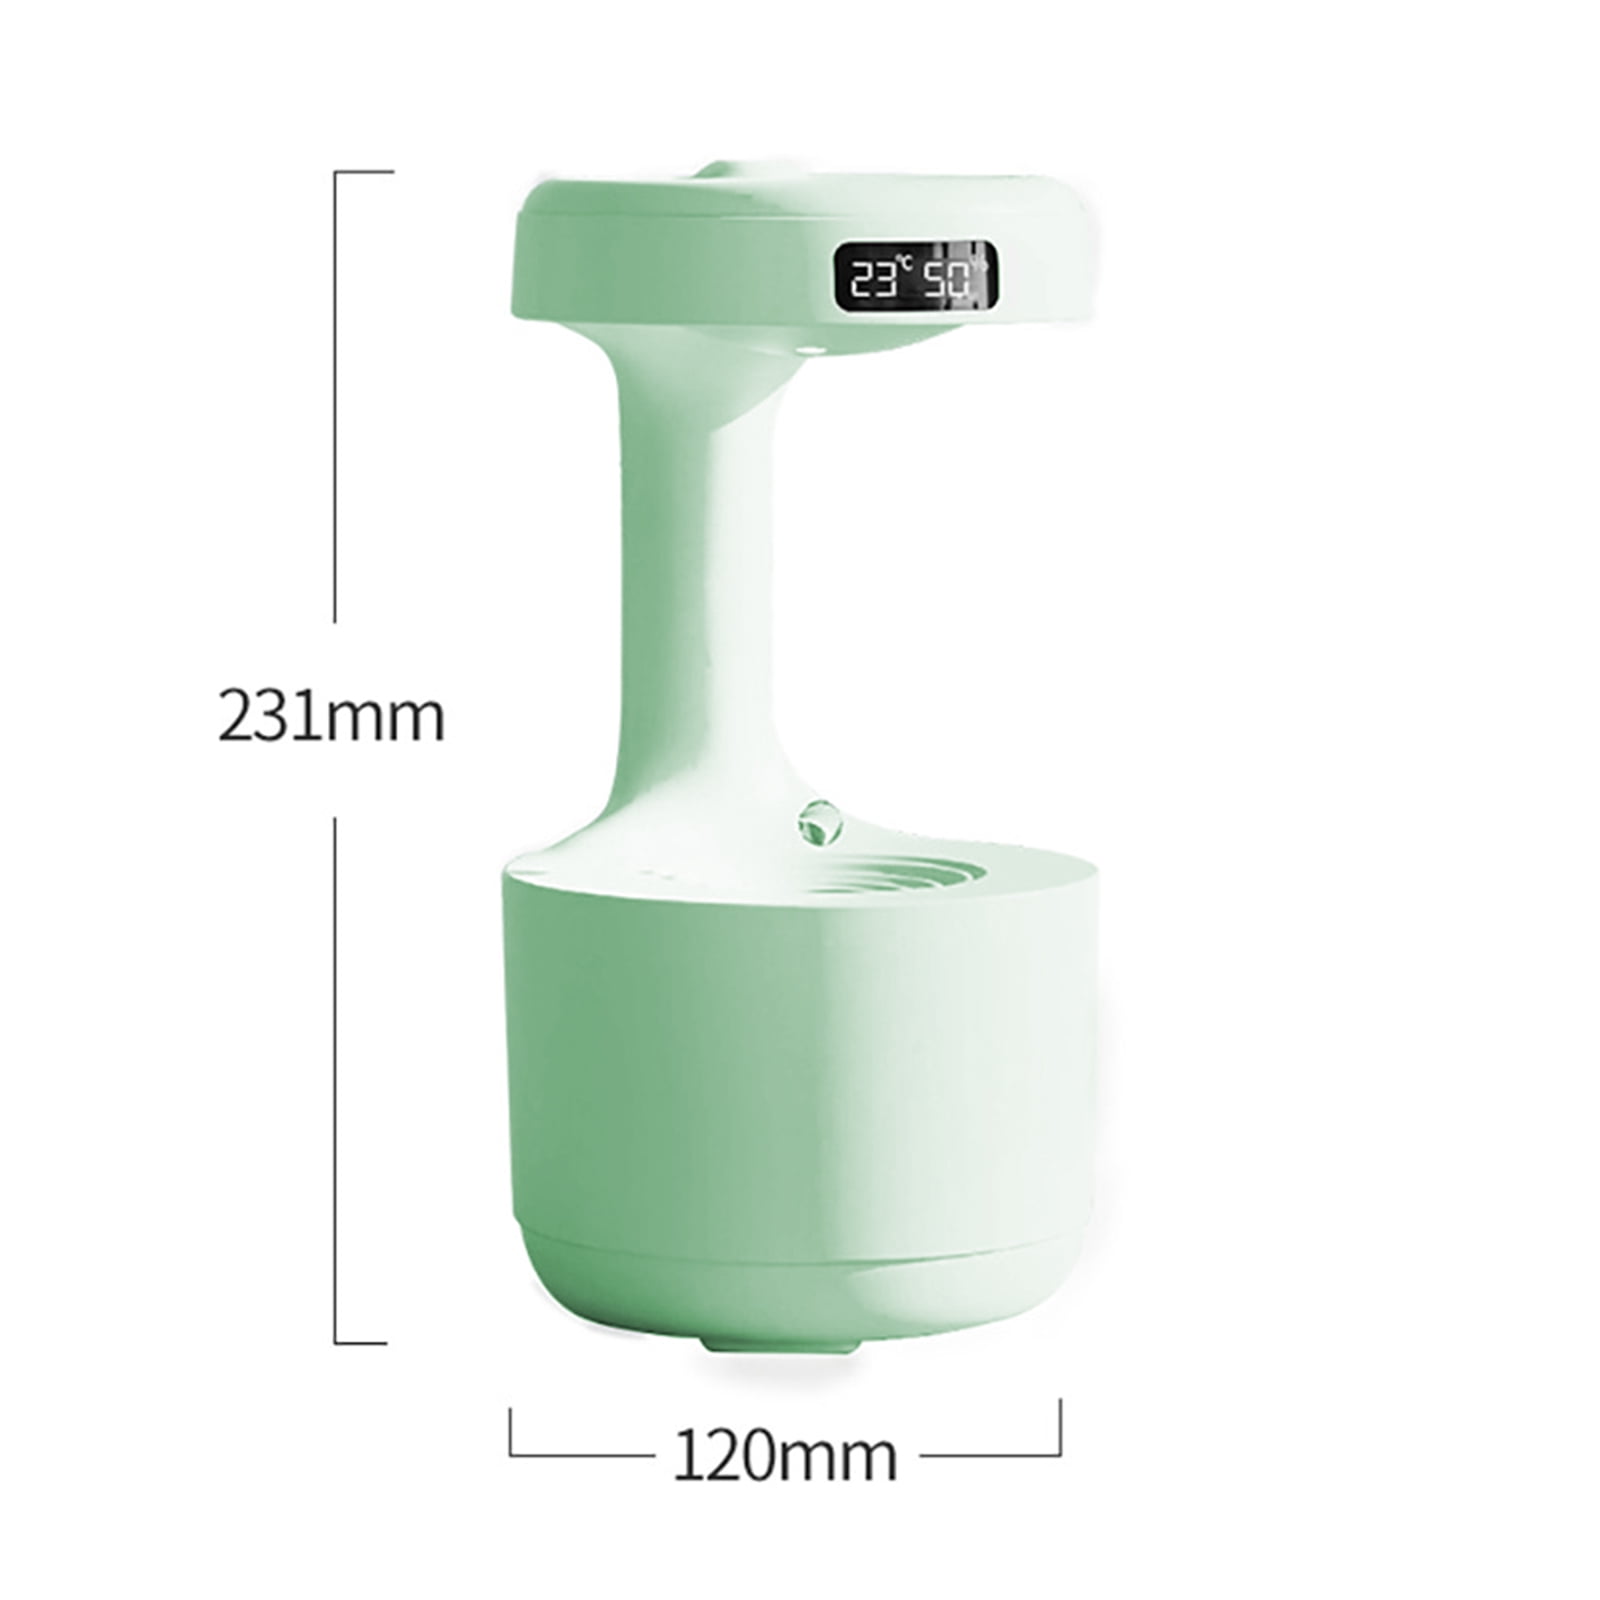 Portable 1000ML Humidifier Makes Room Hot With Lights And USB Mist Sprayer  For Home Q230901 From Look_at_mee, $7.04